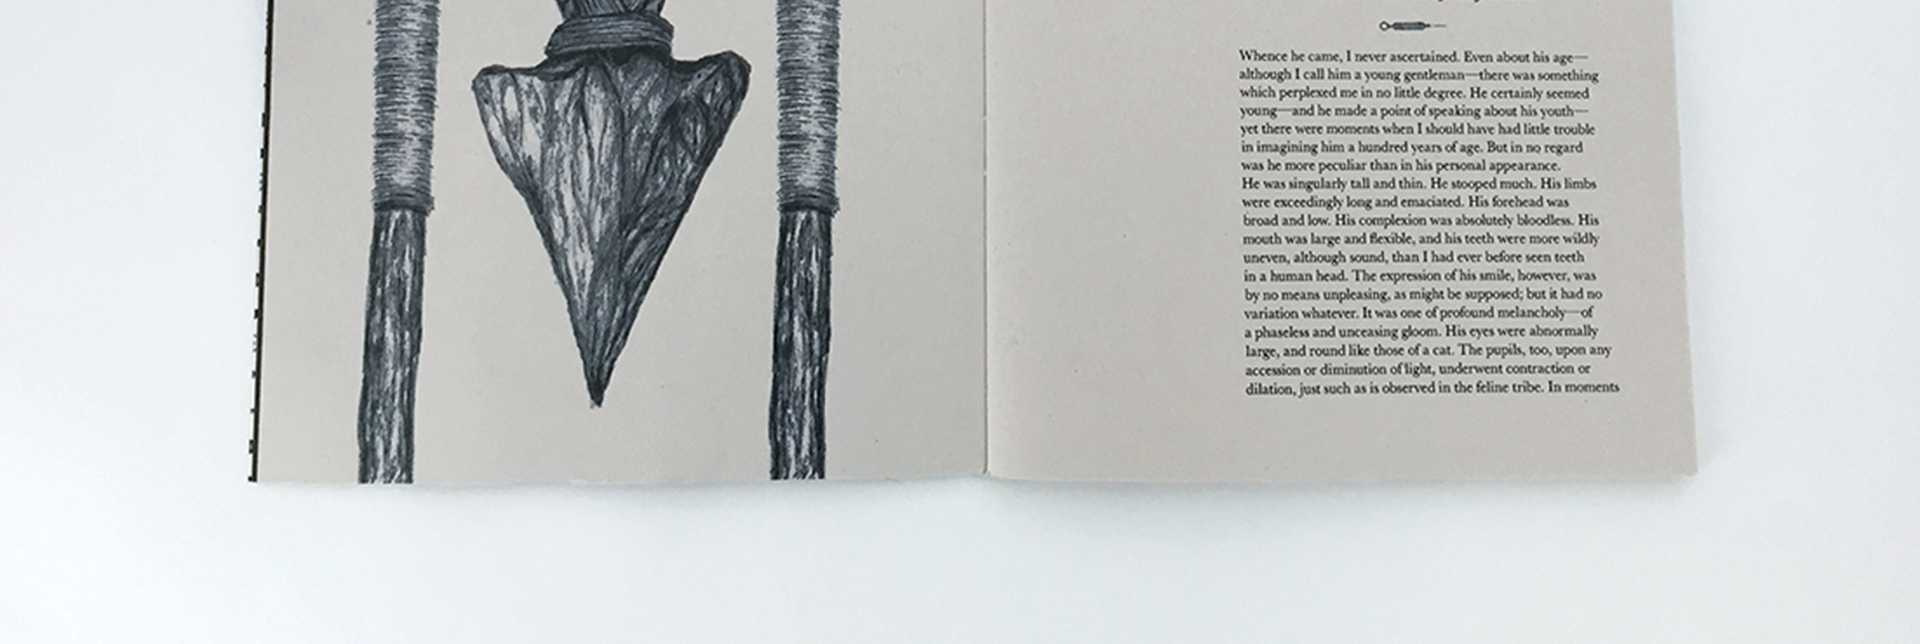 The lower half of a chapter spread in the Edgar Allan Poe short story collection.